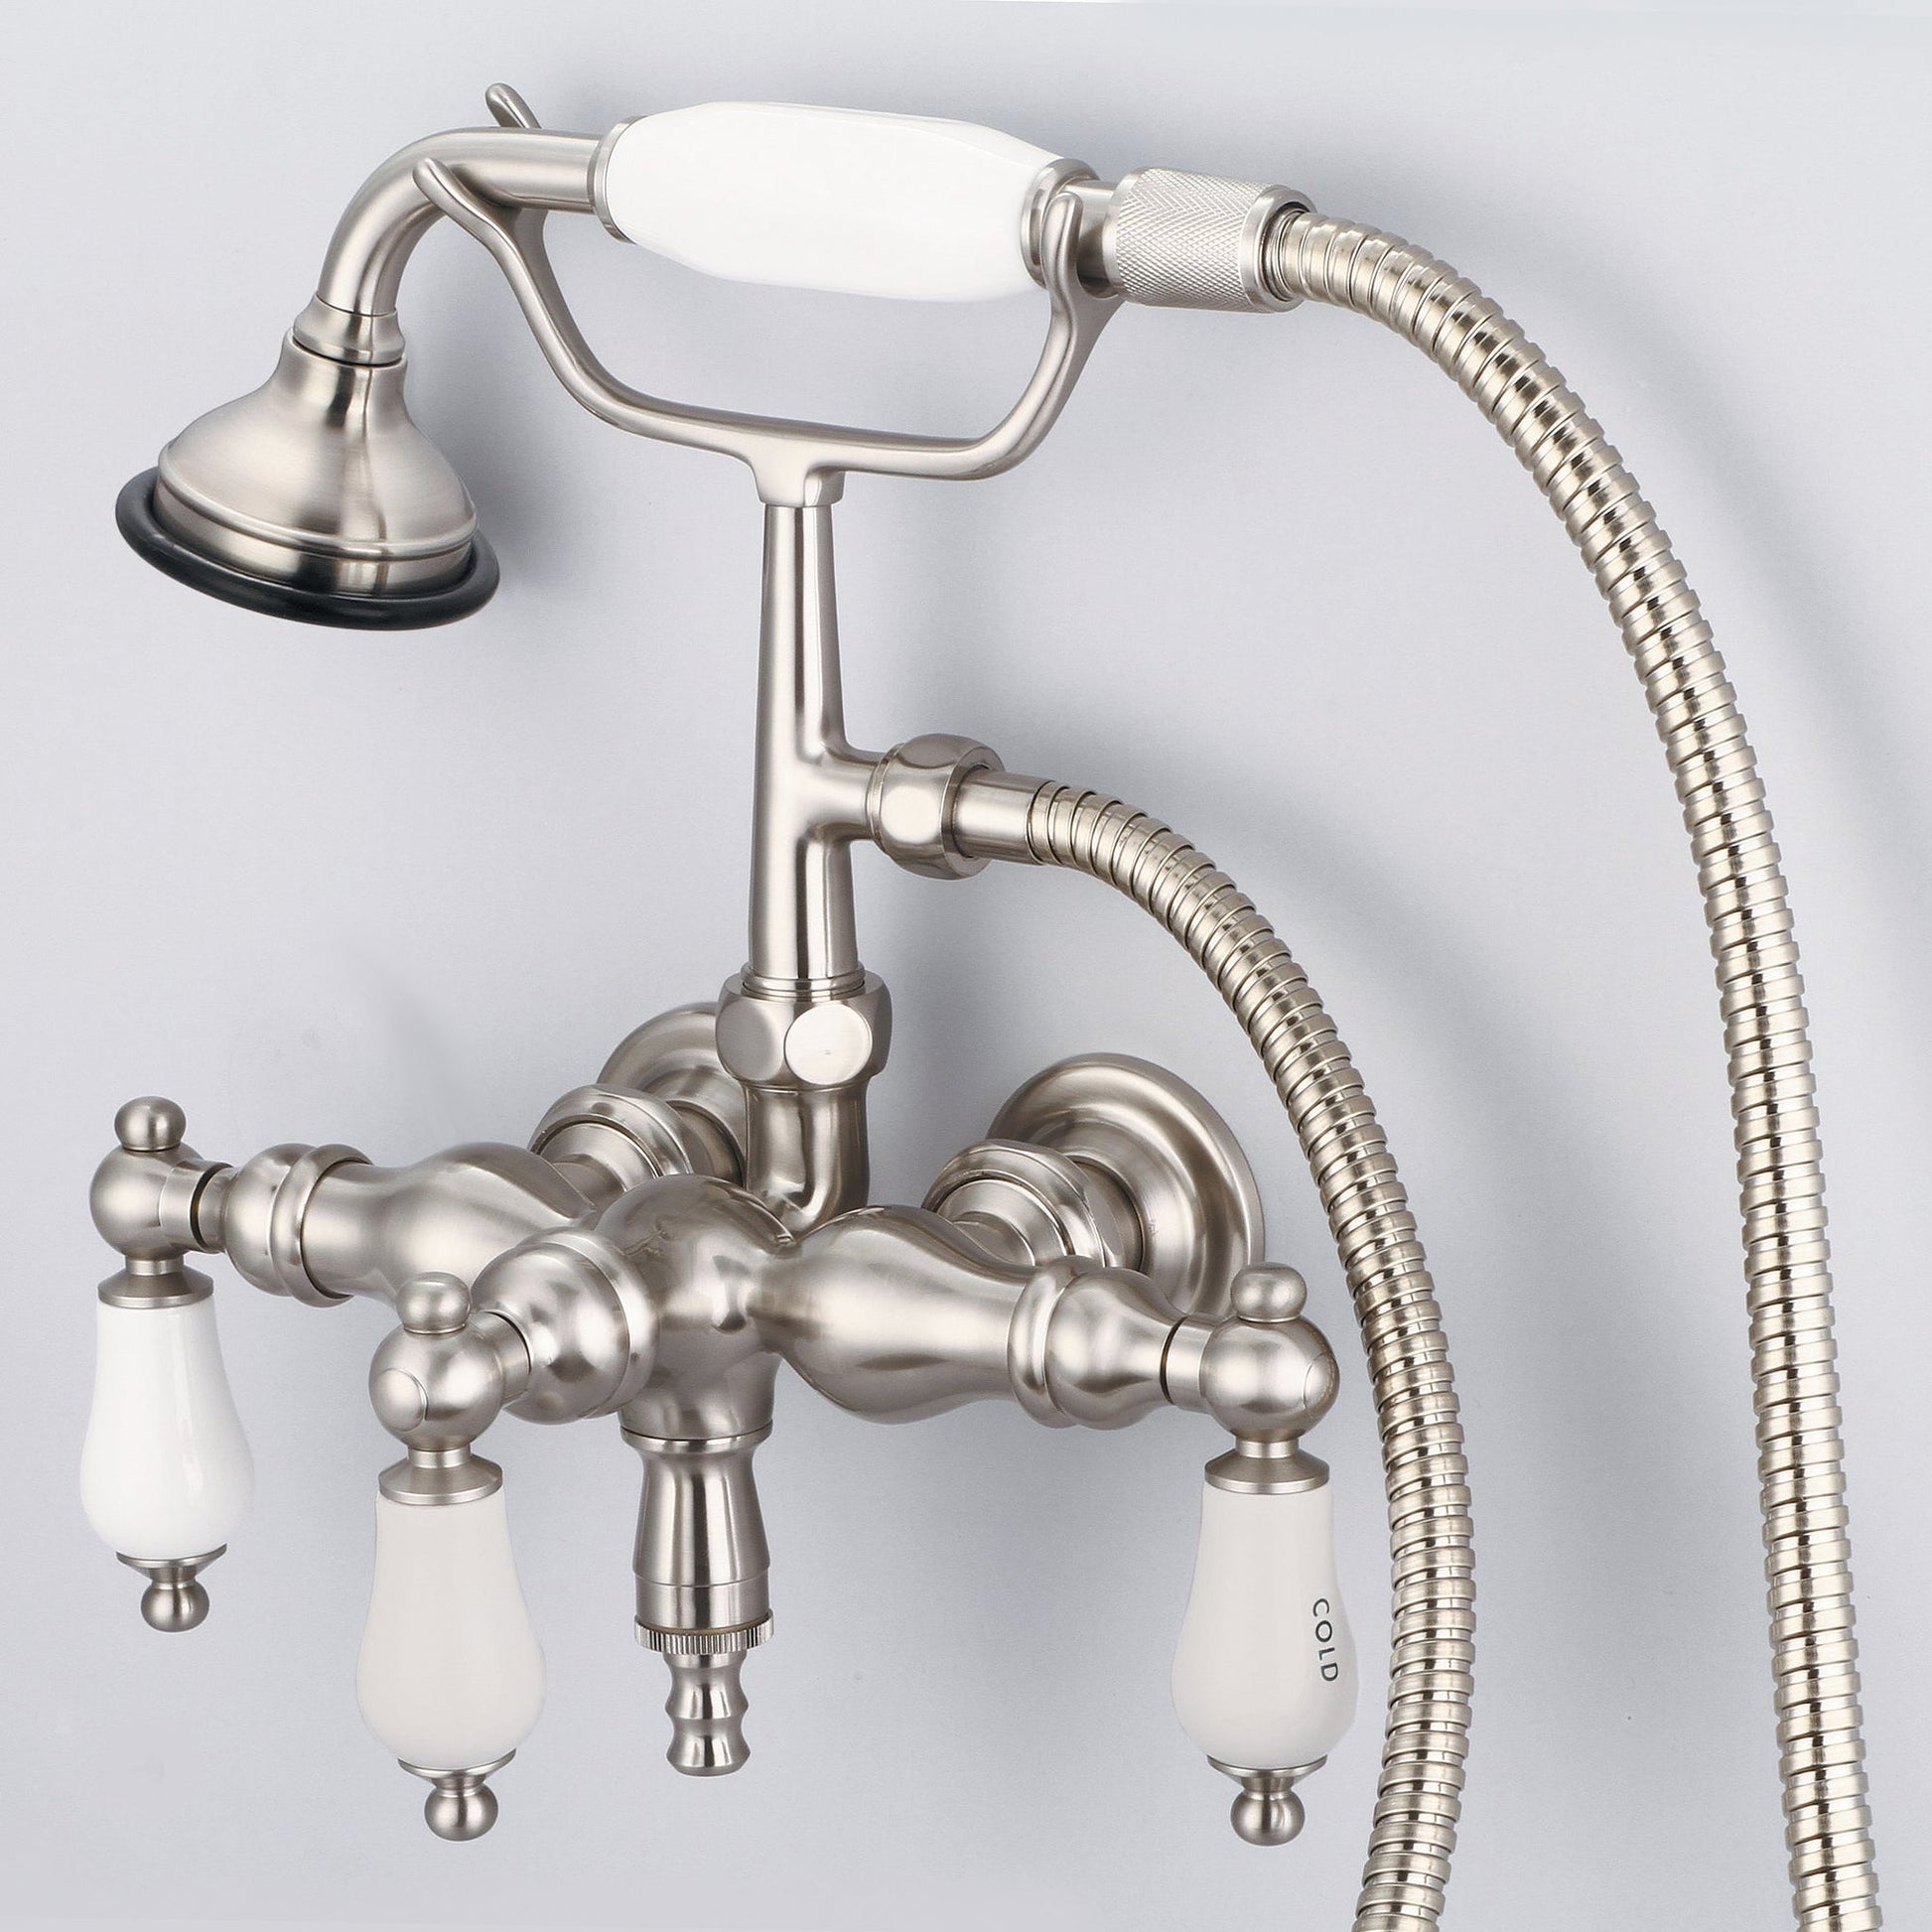 Water Creation Vintage Classic Center Wall Mount Tub F6-0017 9.25" Grey Solid Brass Faucet With Down Spout, Straight Wall Connector And Handheld Shower And Porcelain Lever Handles, Hot And Cold Labels Included